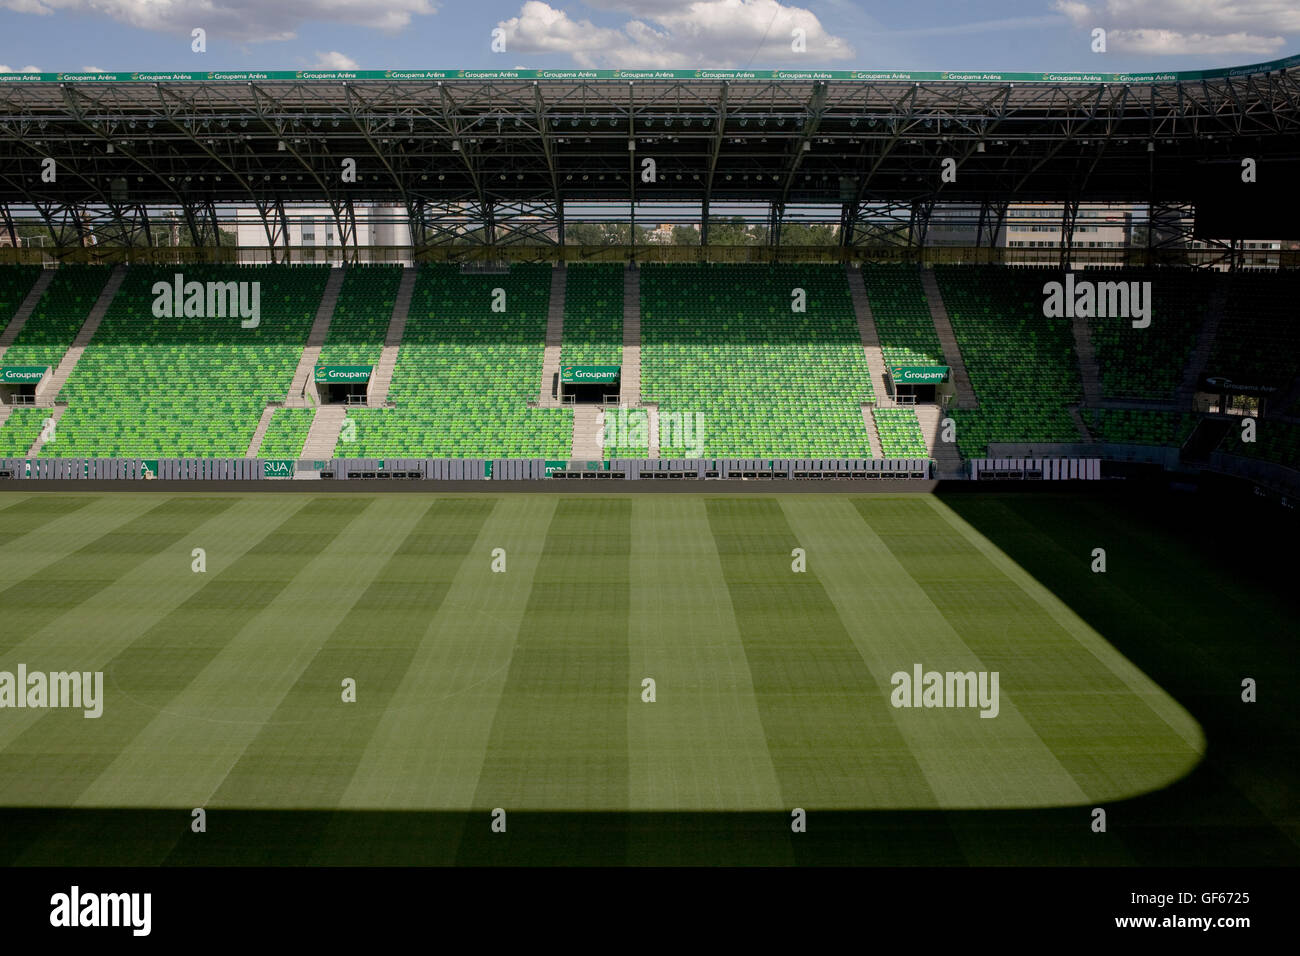 Groupama Arena Sports Stadium With Seating And Pitch Stock Photo Alamy